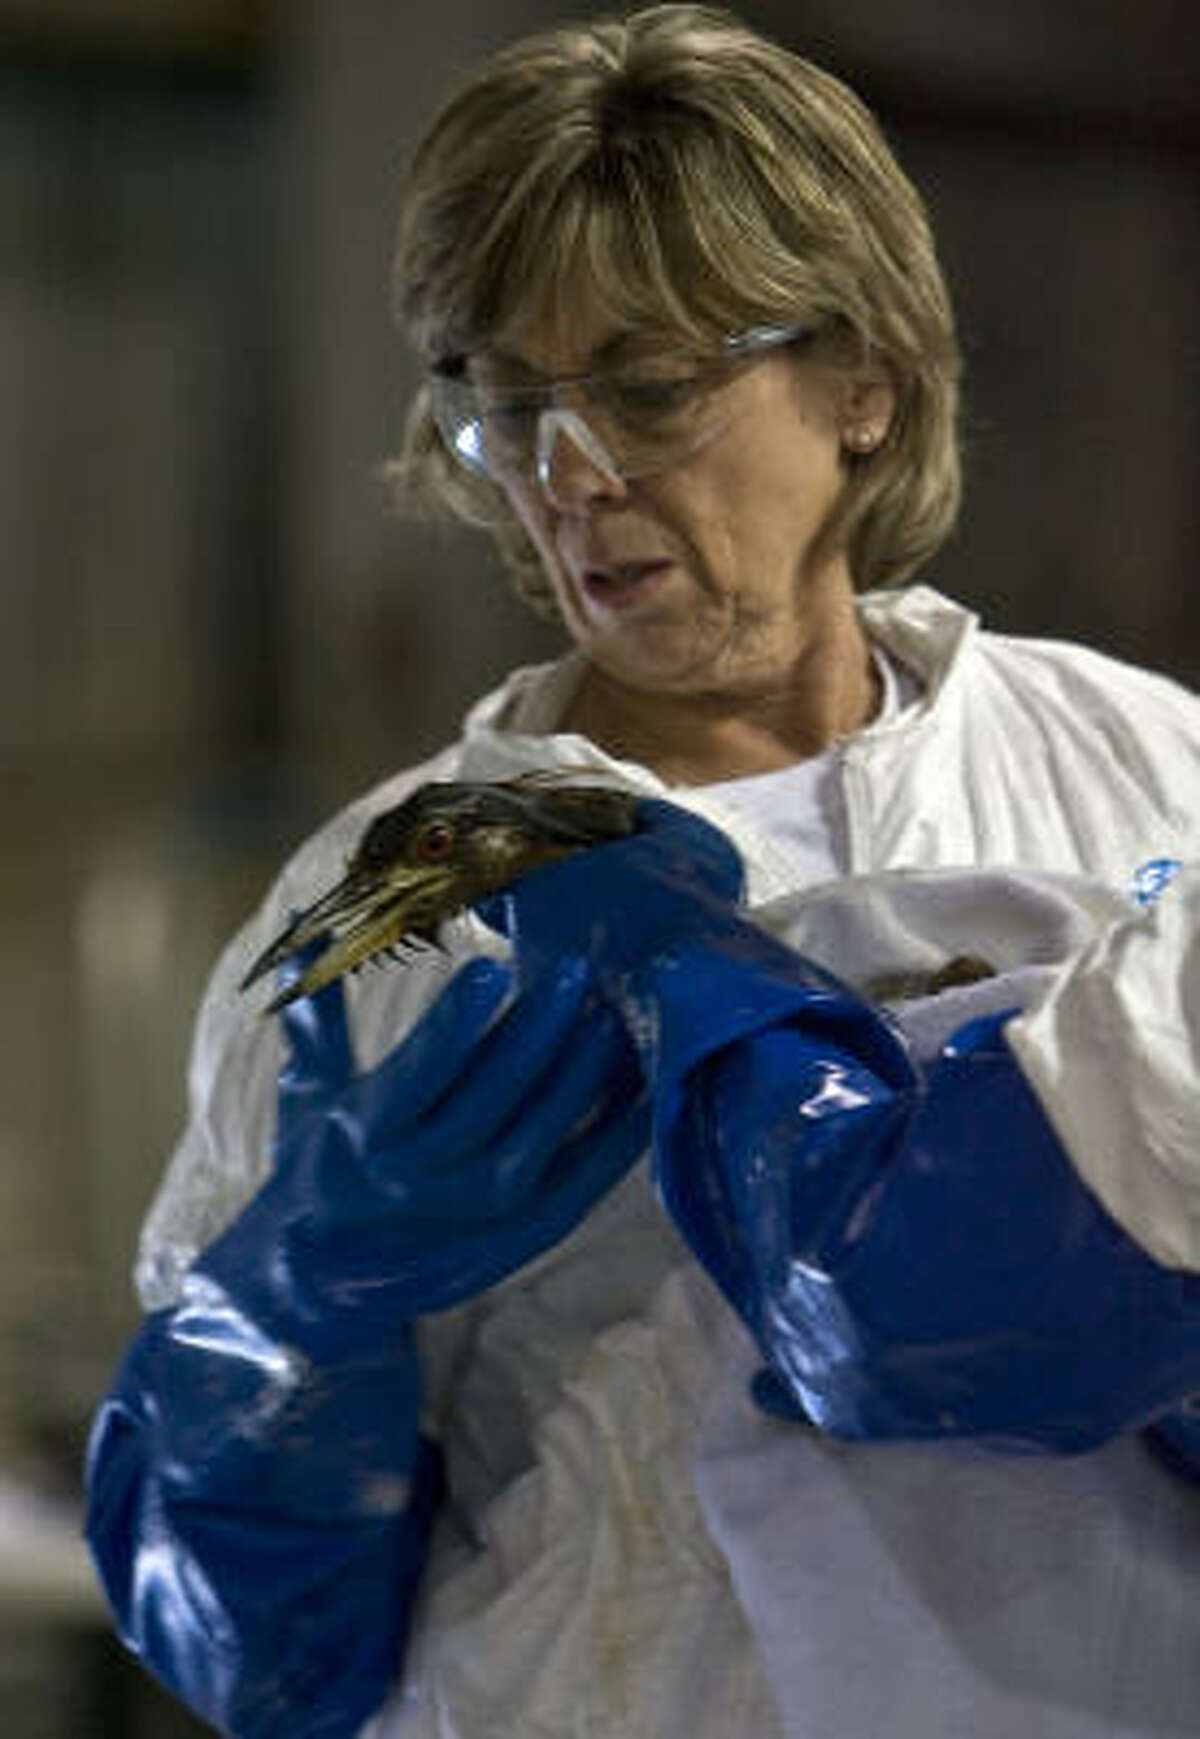 Linda Holmes with Wildlife Response Services cleans a Yellow Crowned Night Herring which was covered in oil.